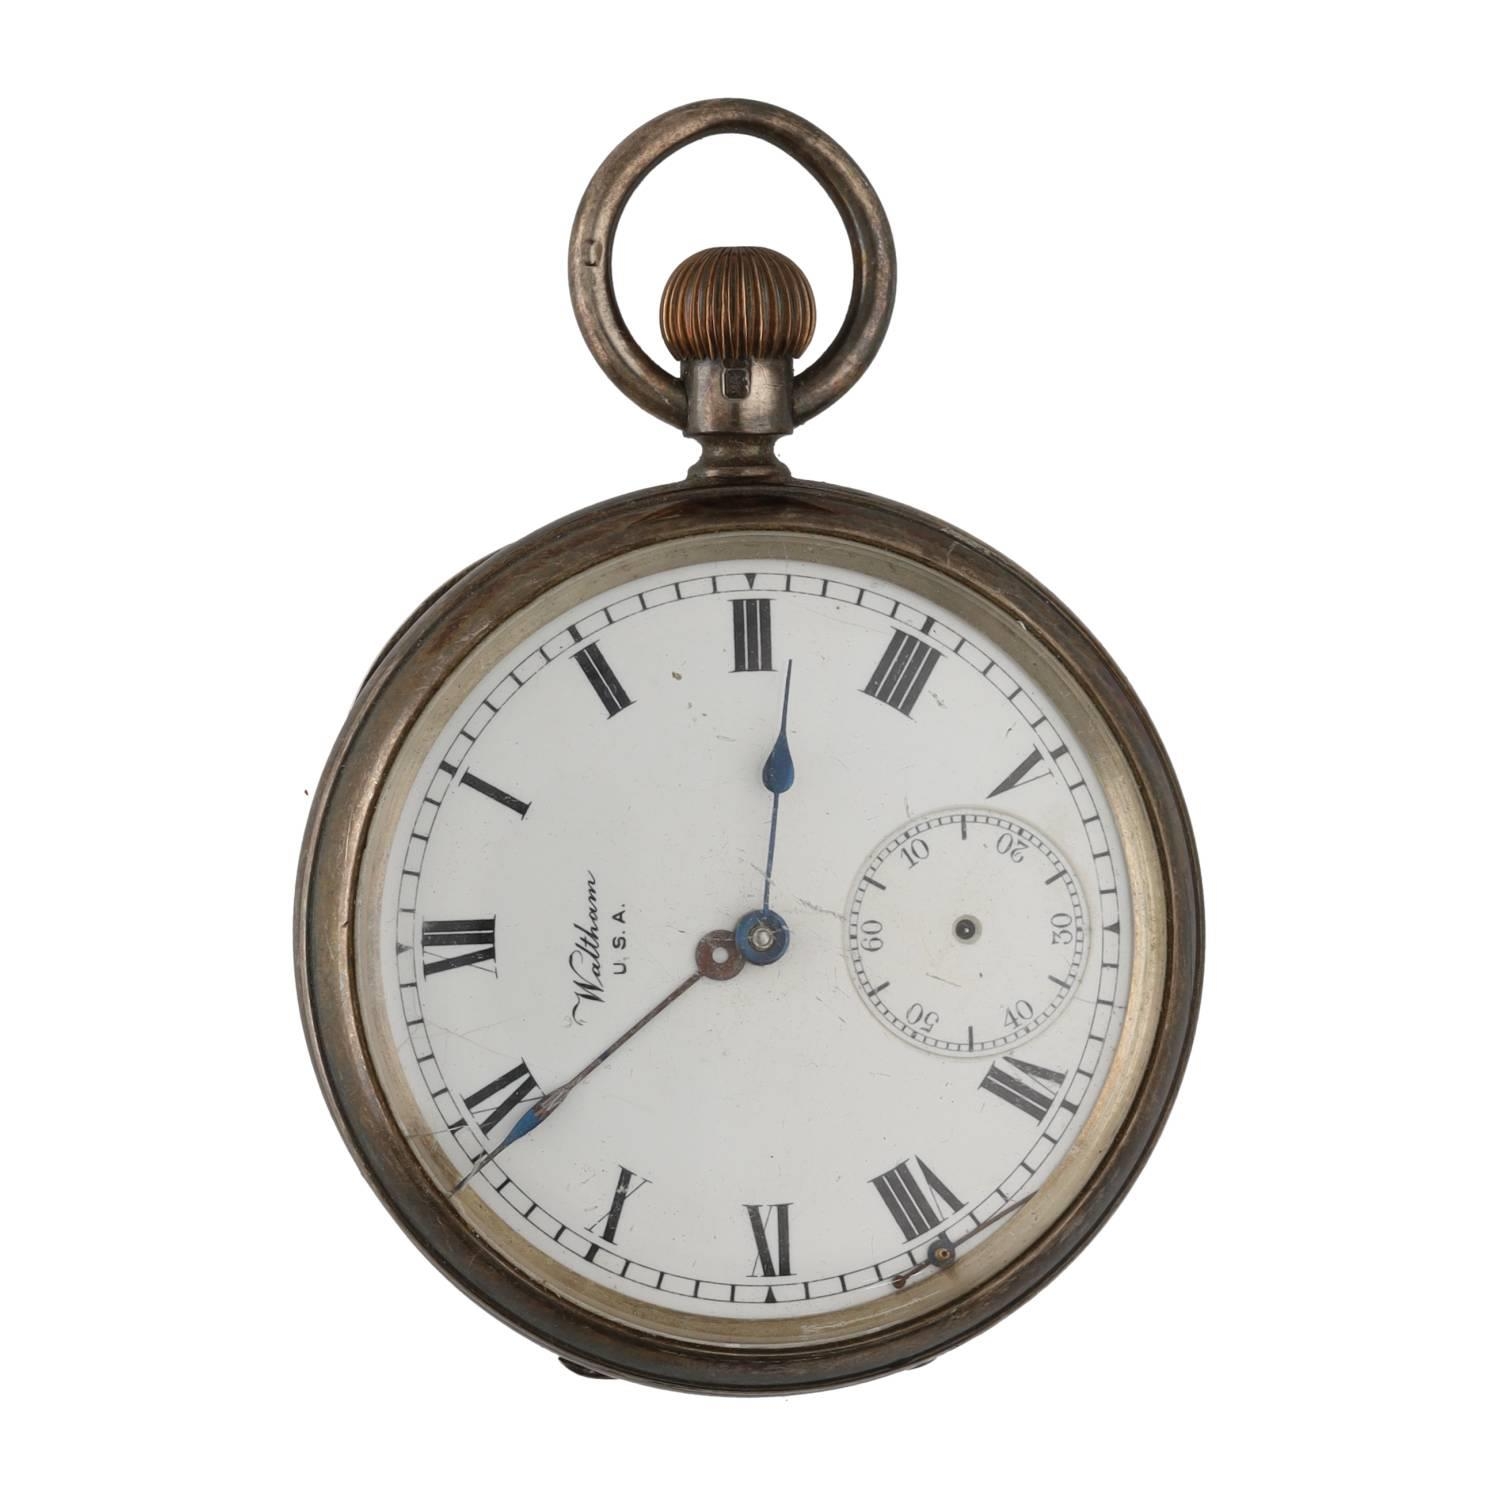 American Waltham 'Royal' silver lever pocket watch, circa 1907, serial no. 16179970, signed 17 jewel - Image 2 of 4